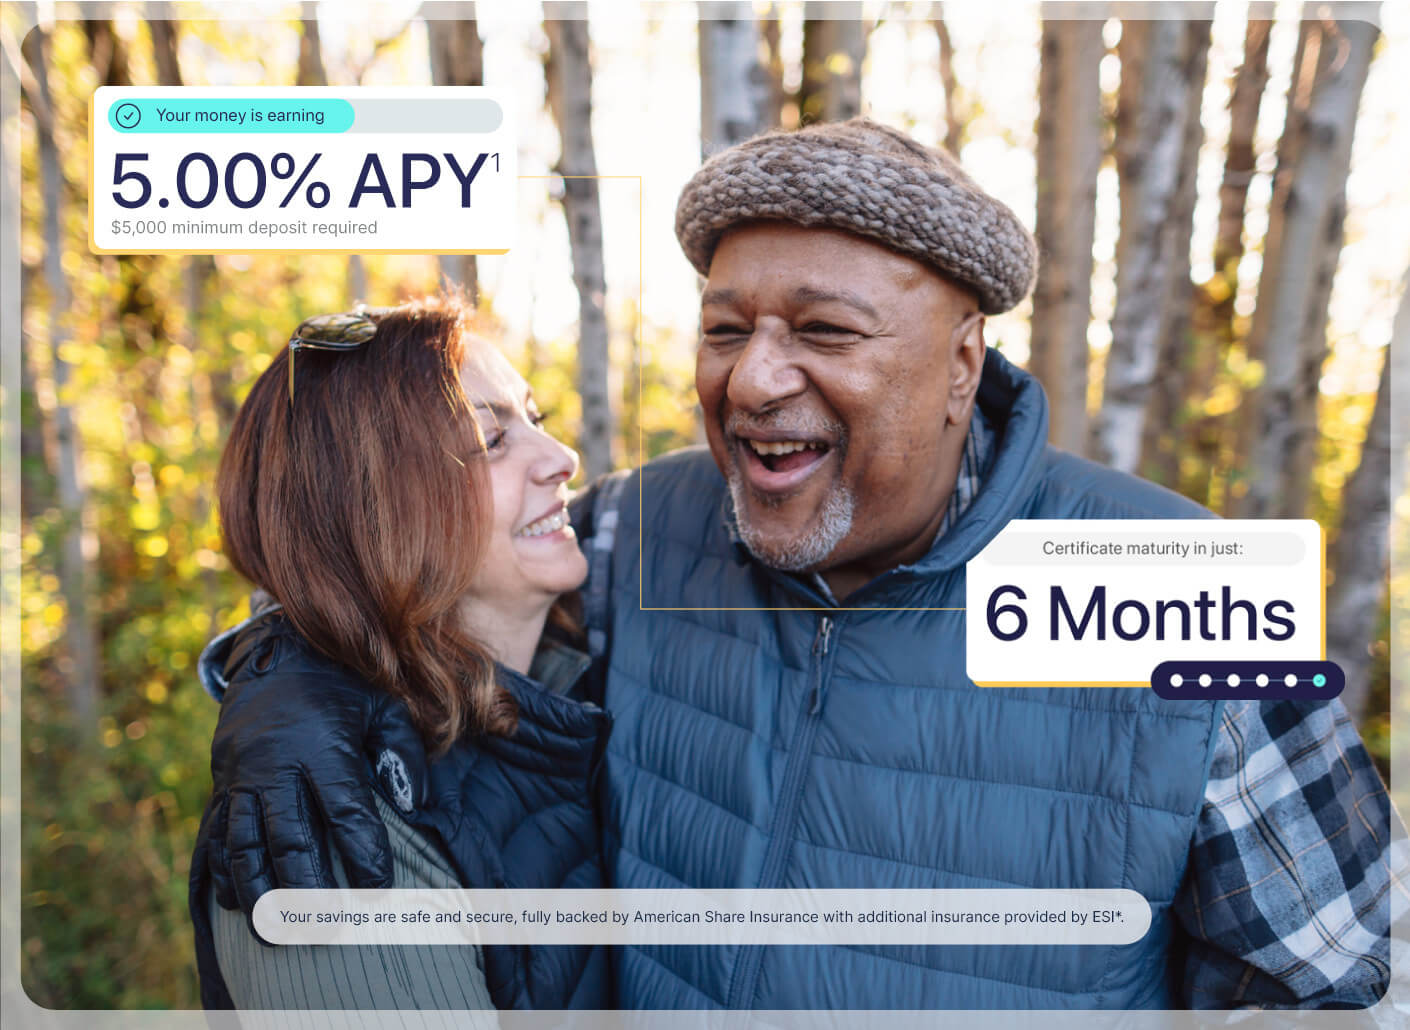 Your money is earning 5.00% APY ($5,000 minimum deposit required) | Certificate maturity in just 6 months [mobile]